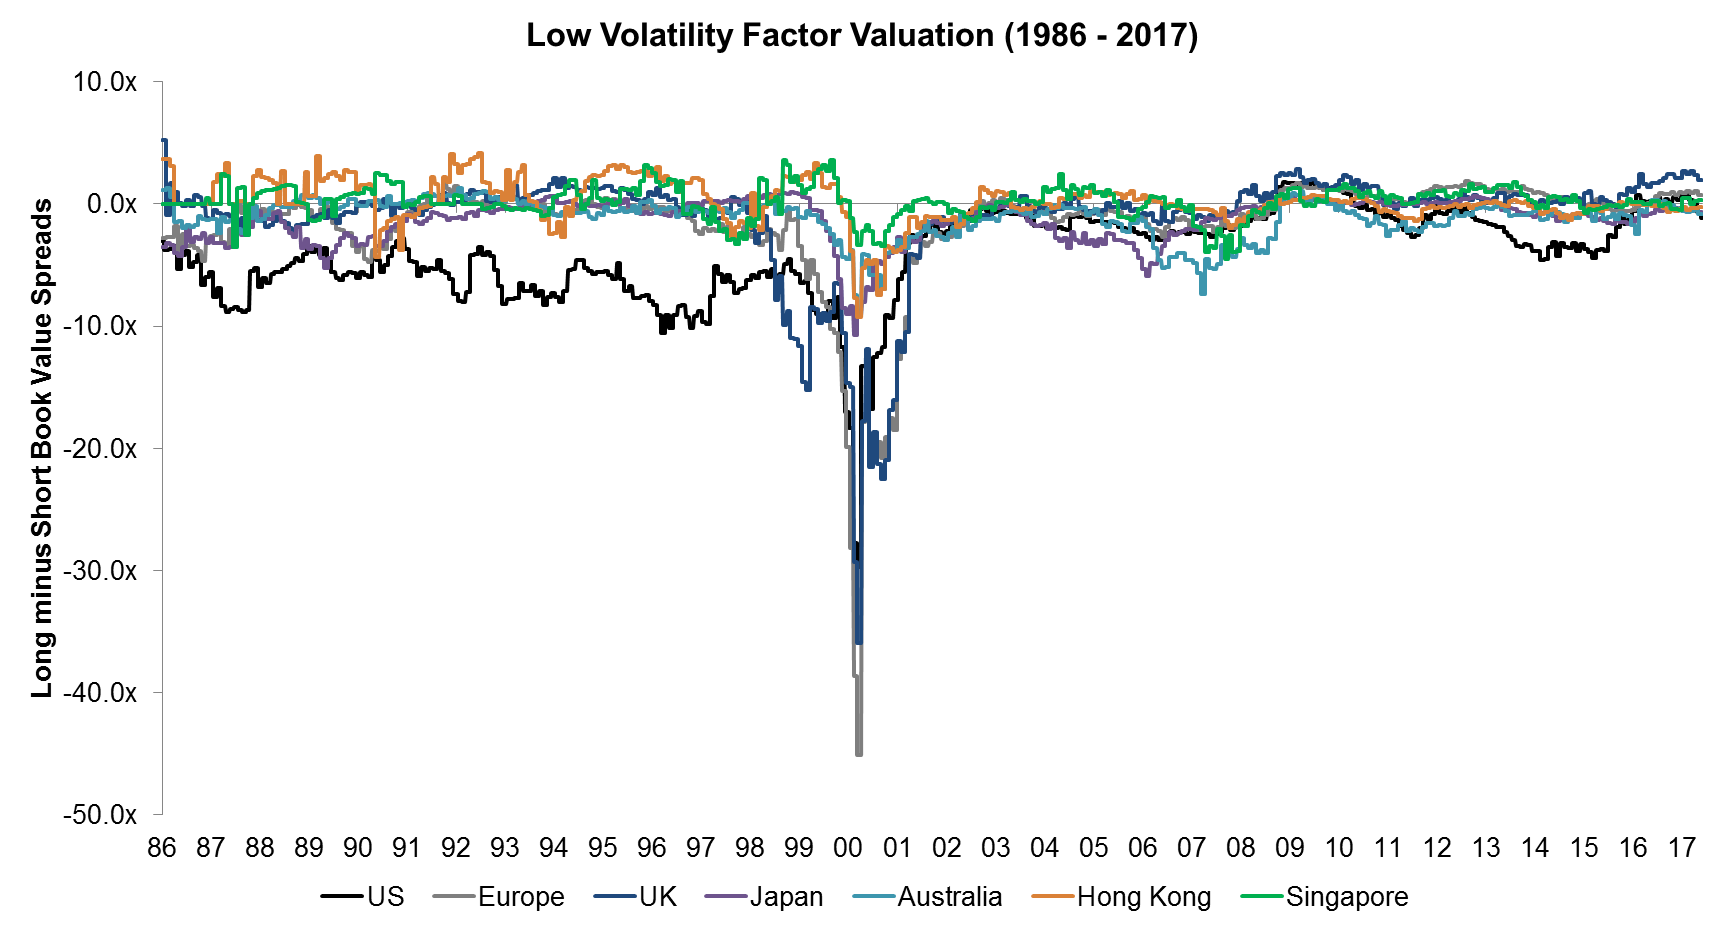 Low Volatility Factor Valuation (1986 - 2017)